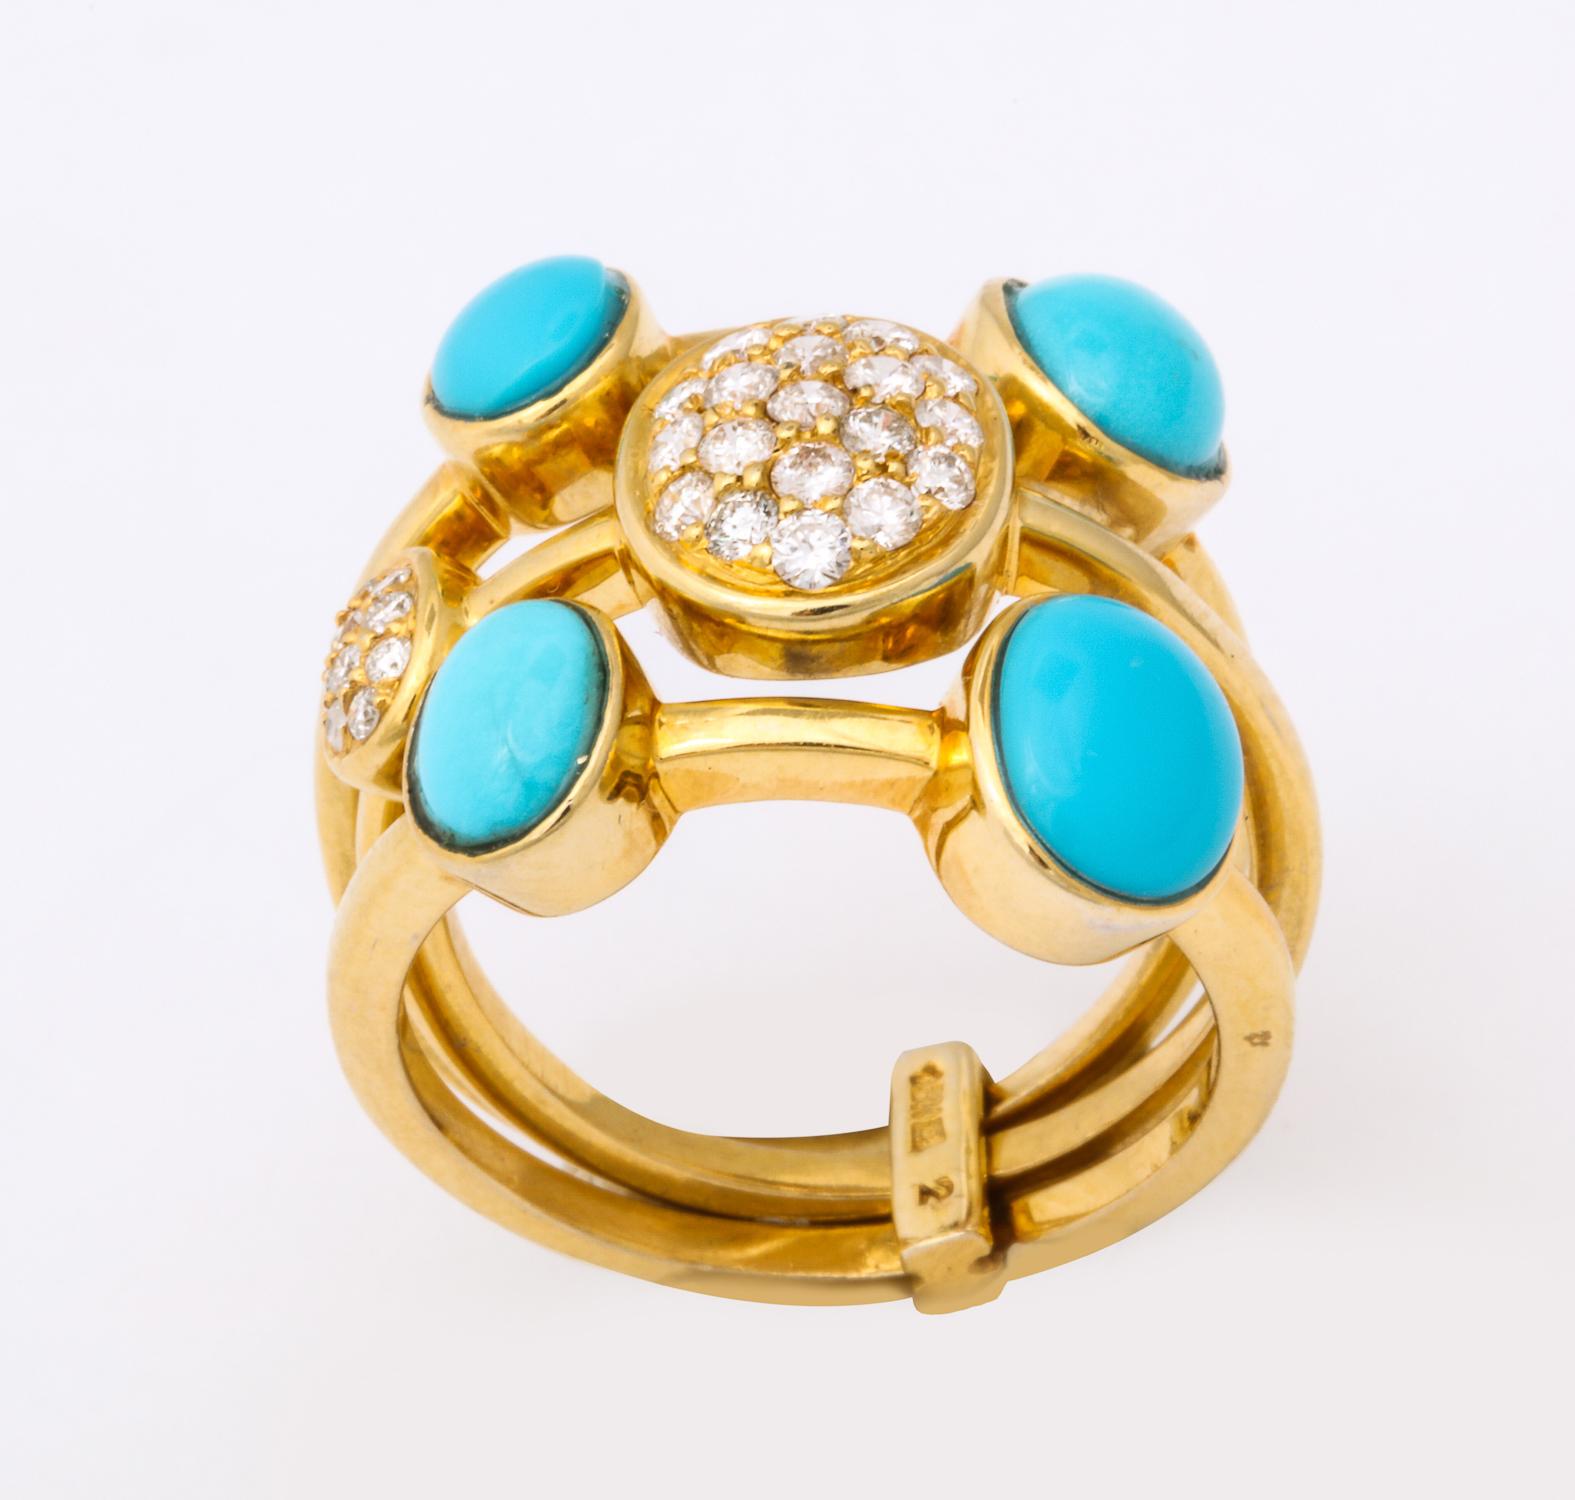 One Ladies 18kt Yellow Gold Triple Band Harem Style Flexible Ring Composed Of Three Flexible And Moveable Bands Designed With Four Bezel Set Turquoise Stones And Further Embellished With Two Pve Diamond Bezel Set Panels. Diamond Weight Approximately